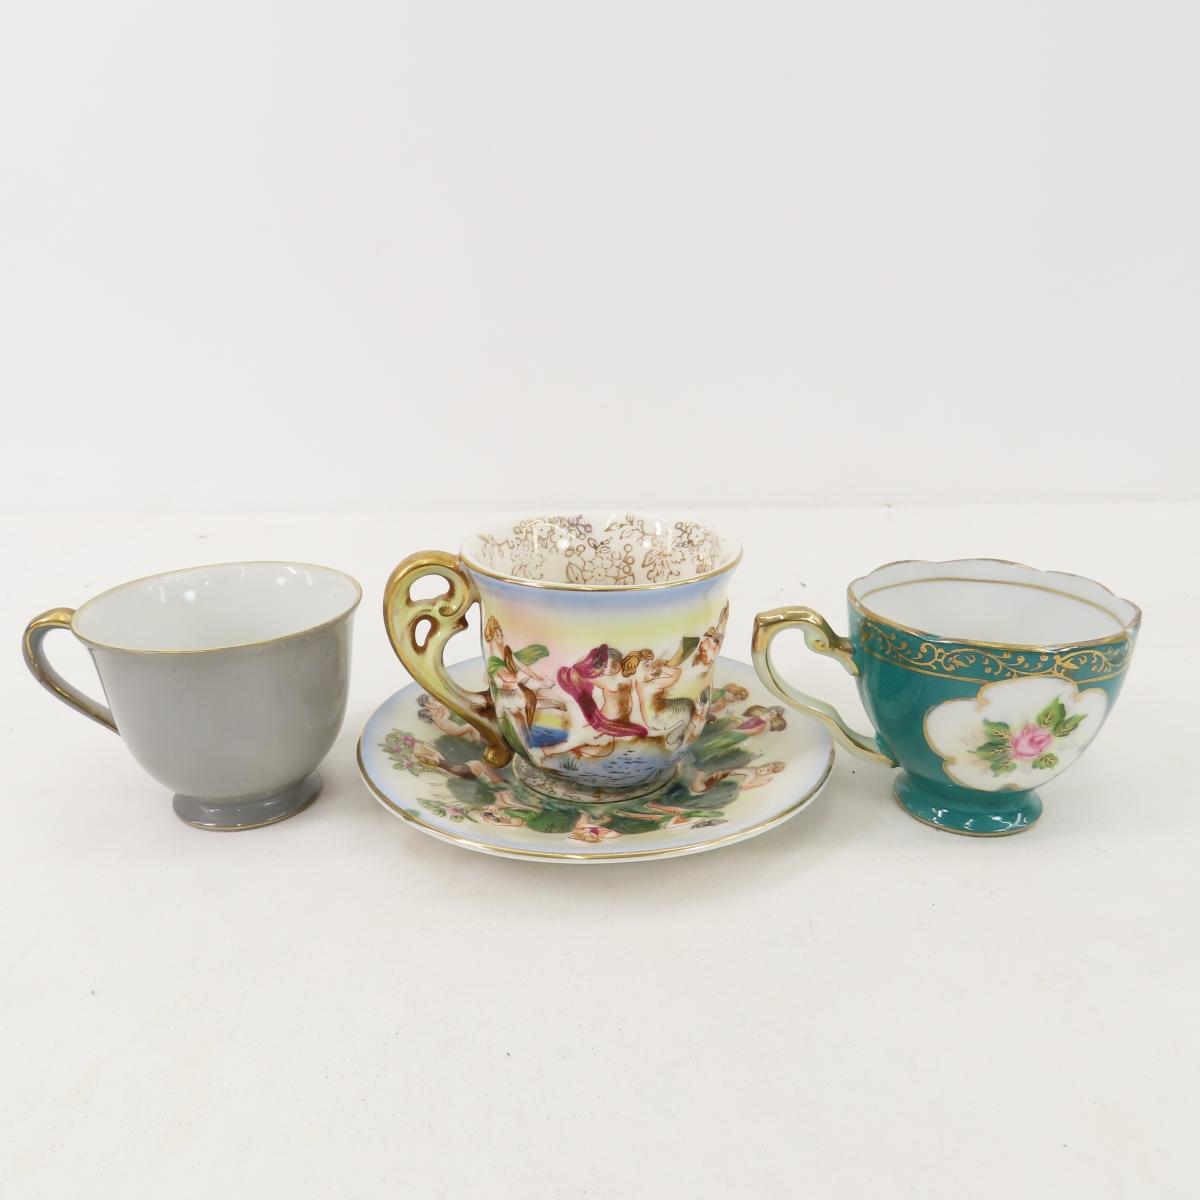 Made in occupied Japan demitasse and teacups